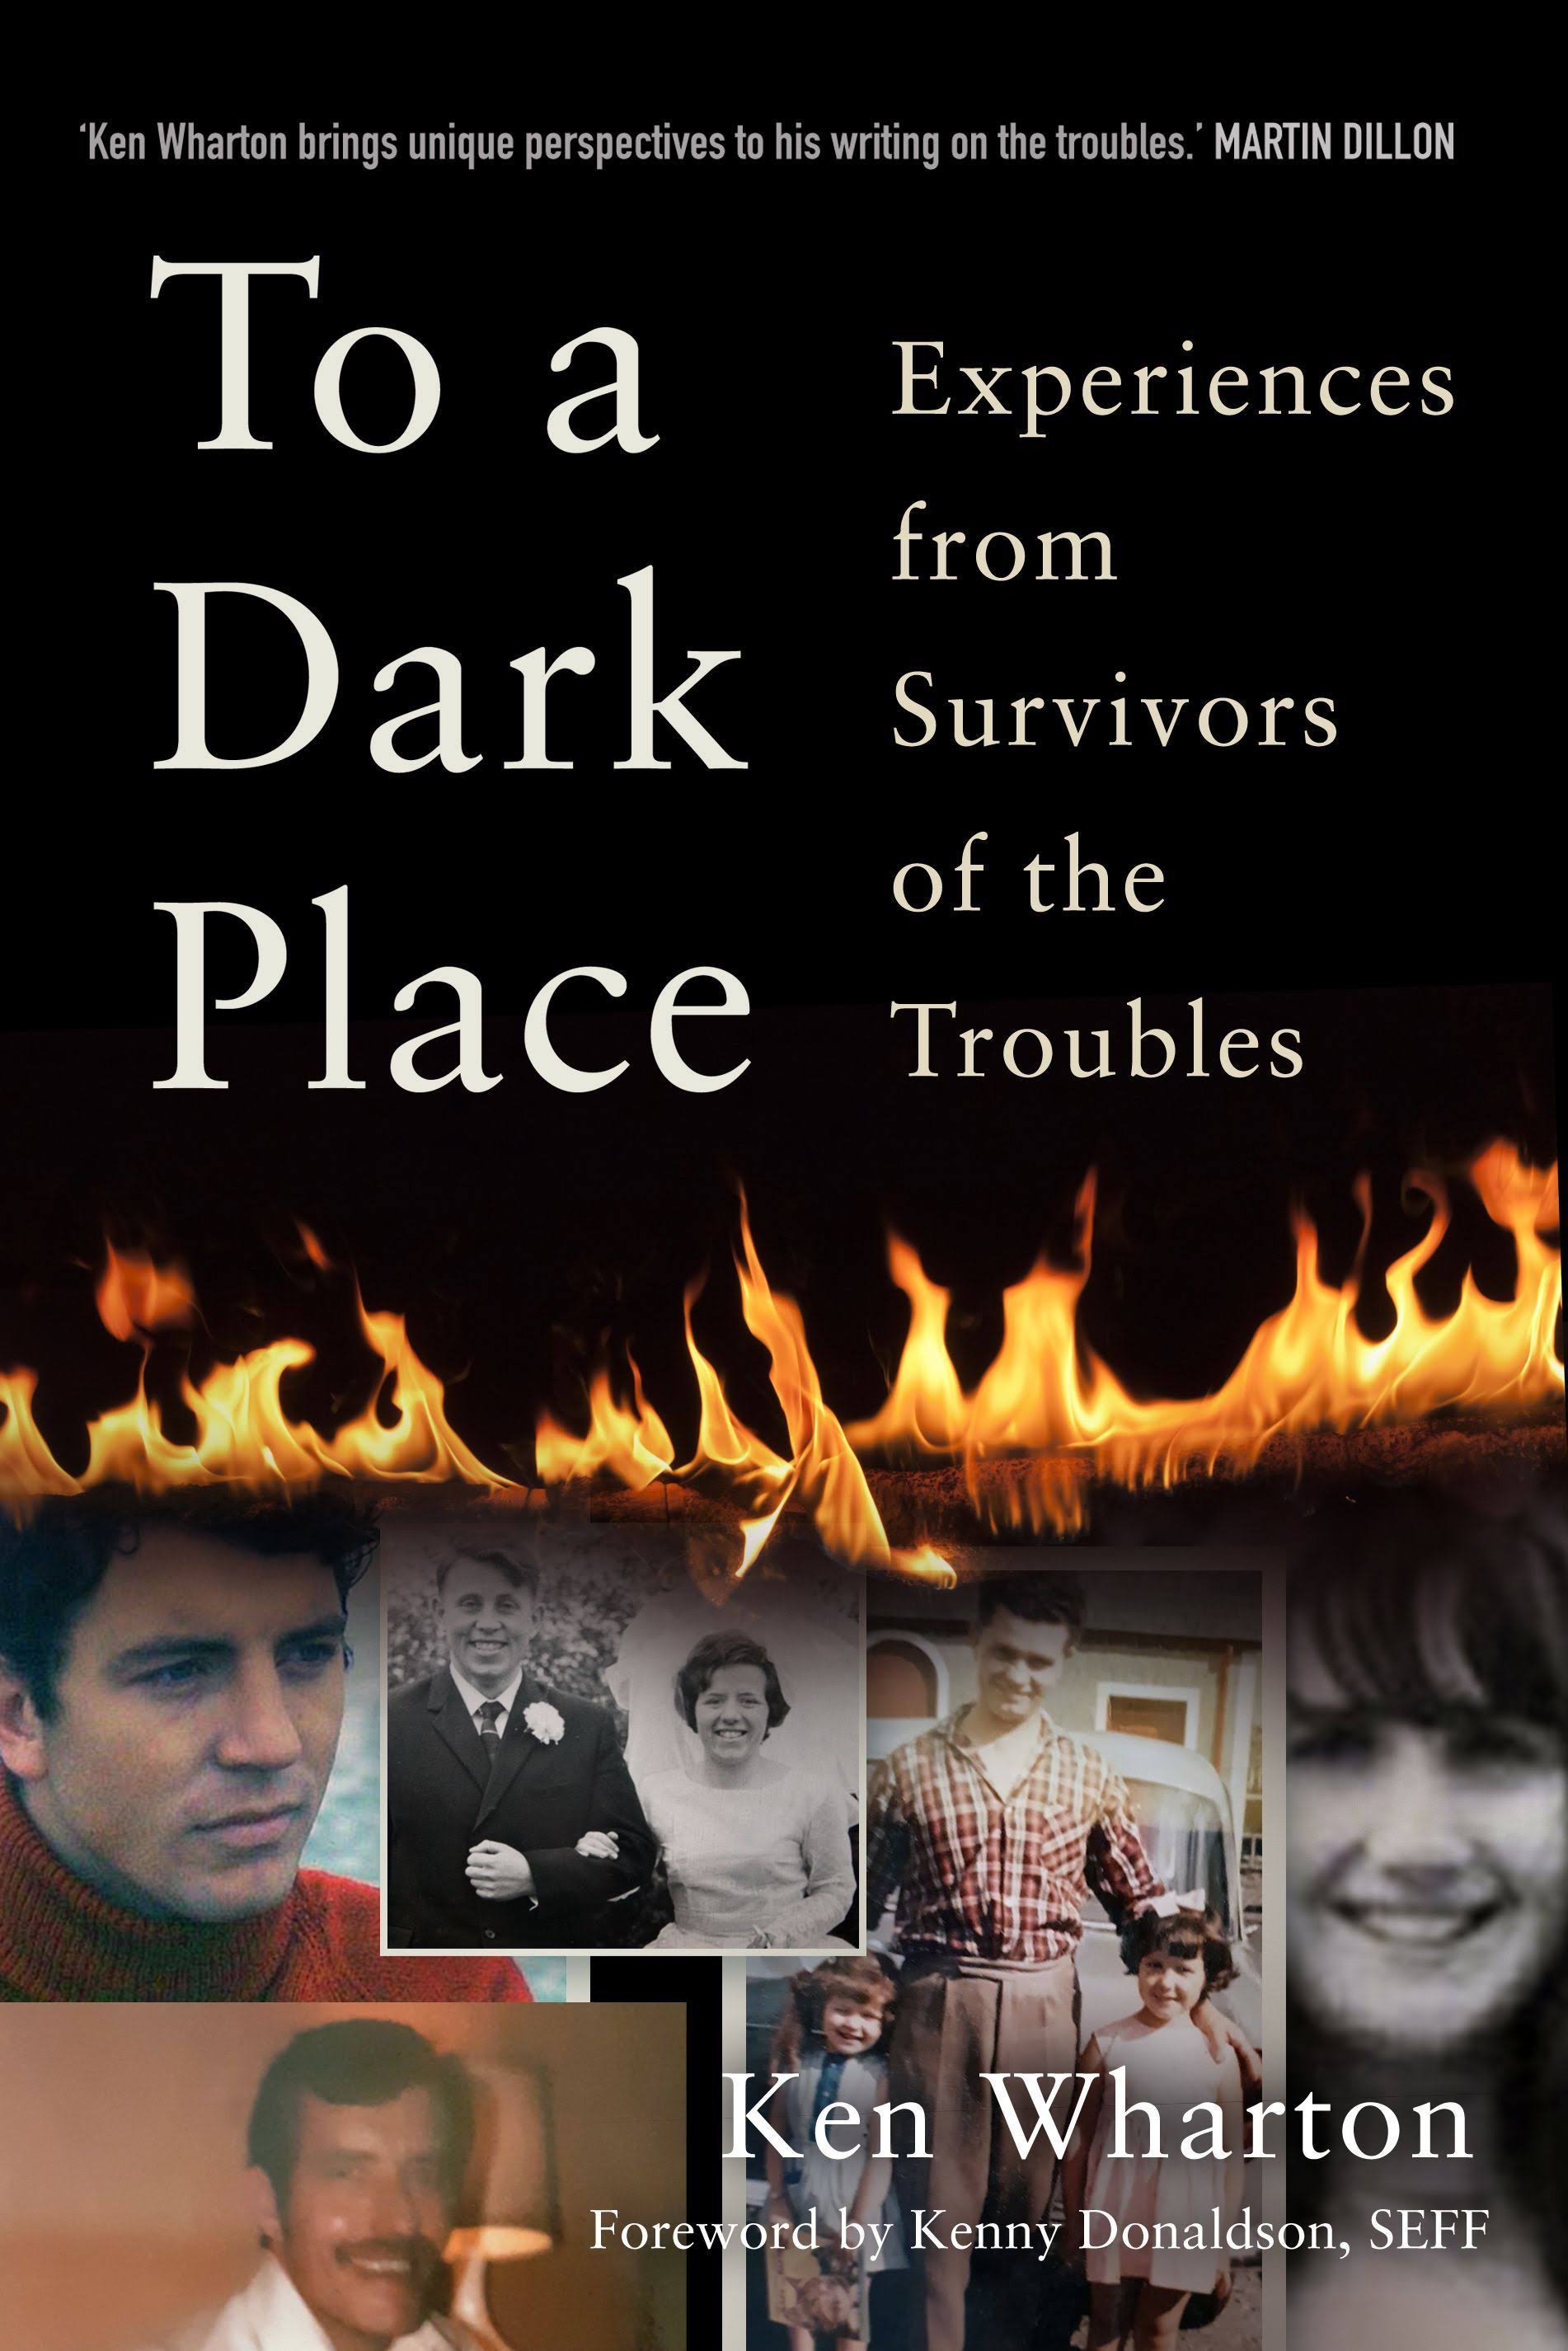 To a Dark Place: Experiences from Survivors of the Troubles [Book]